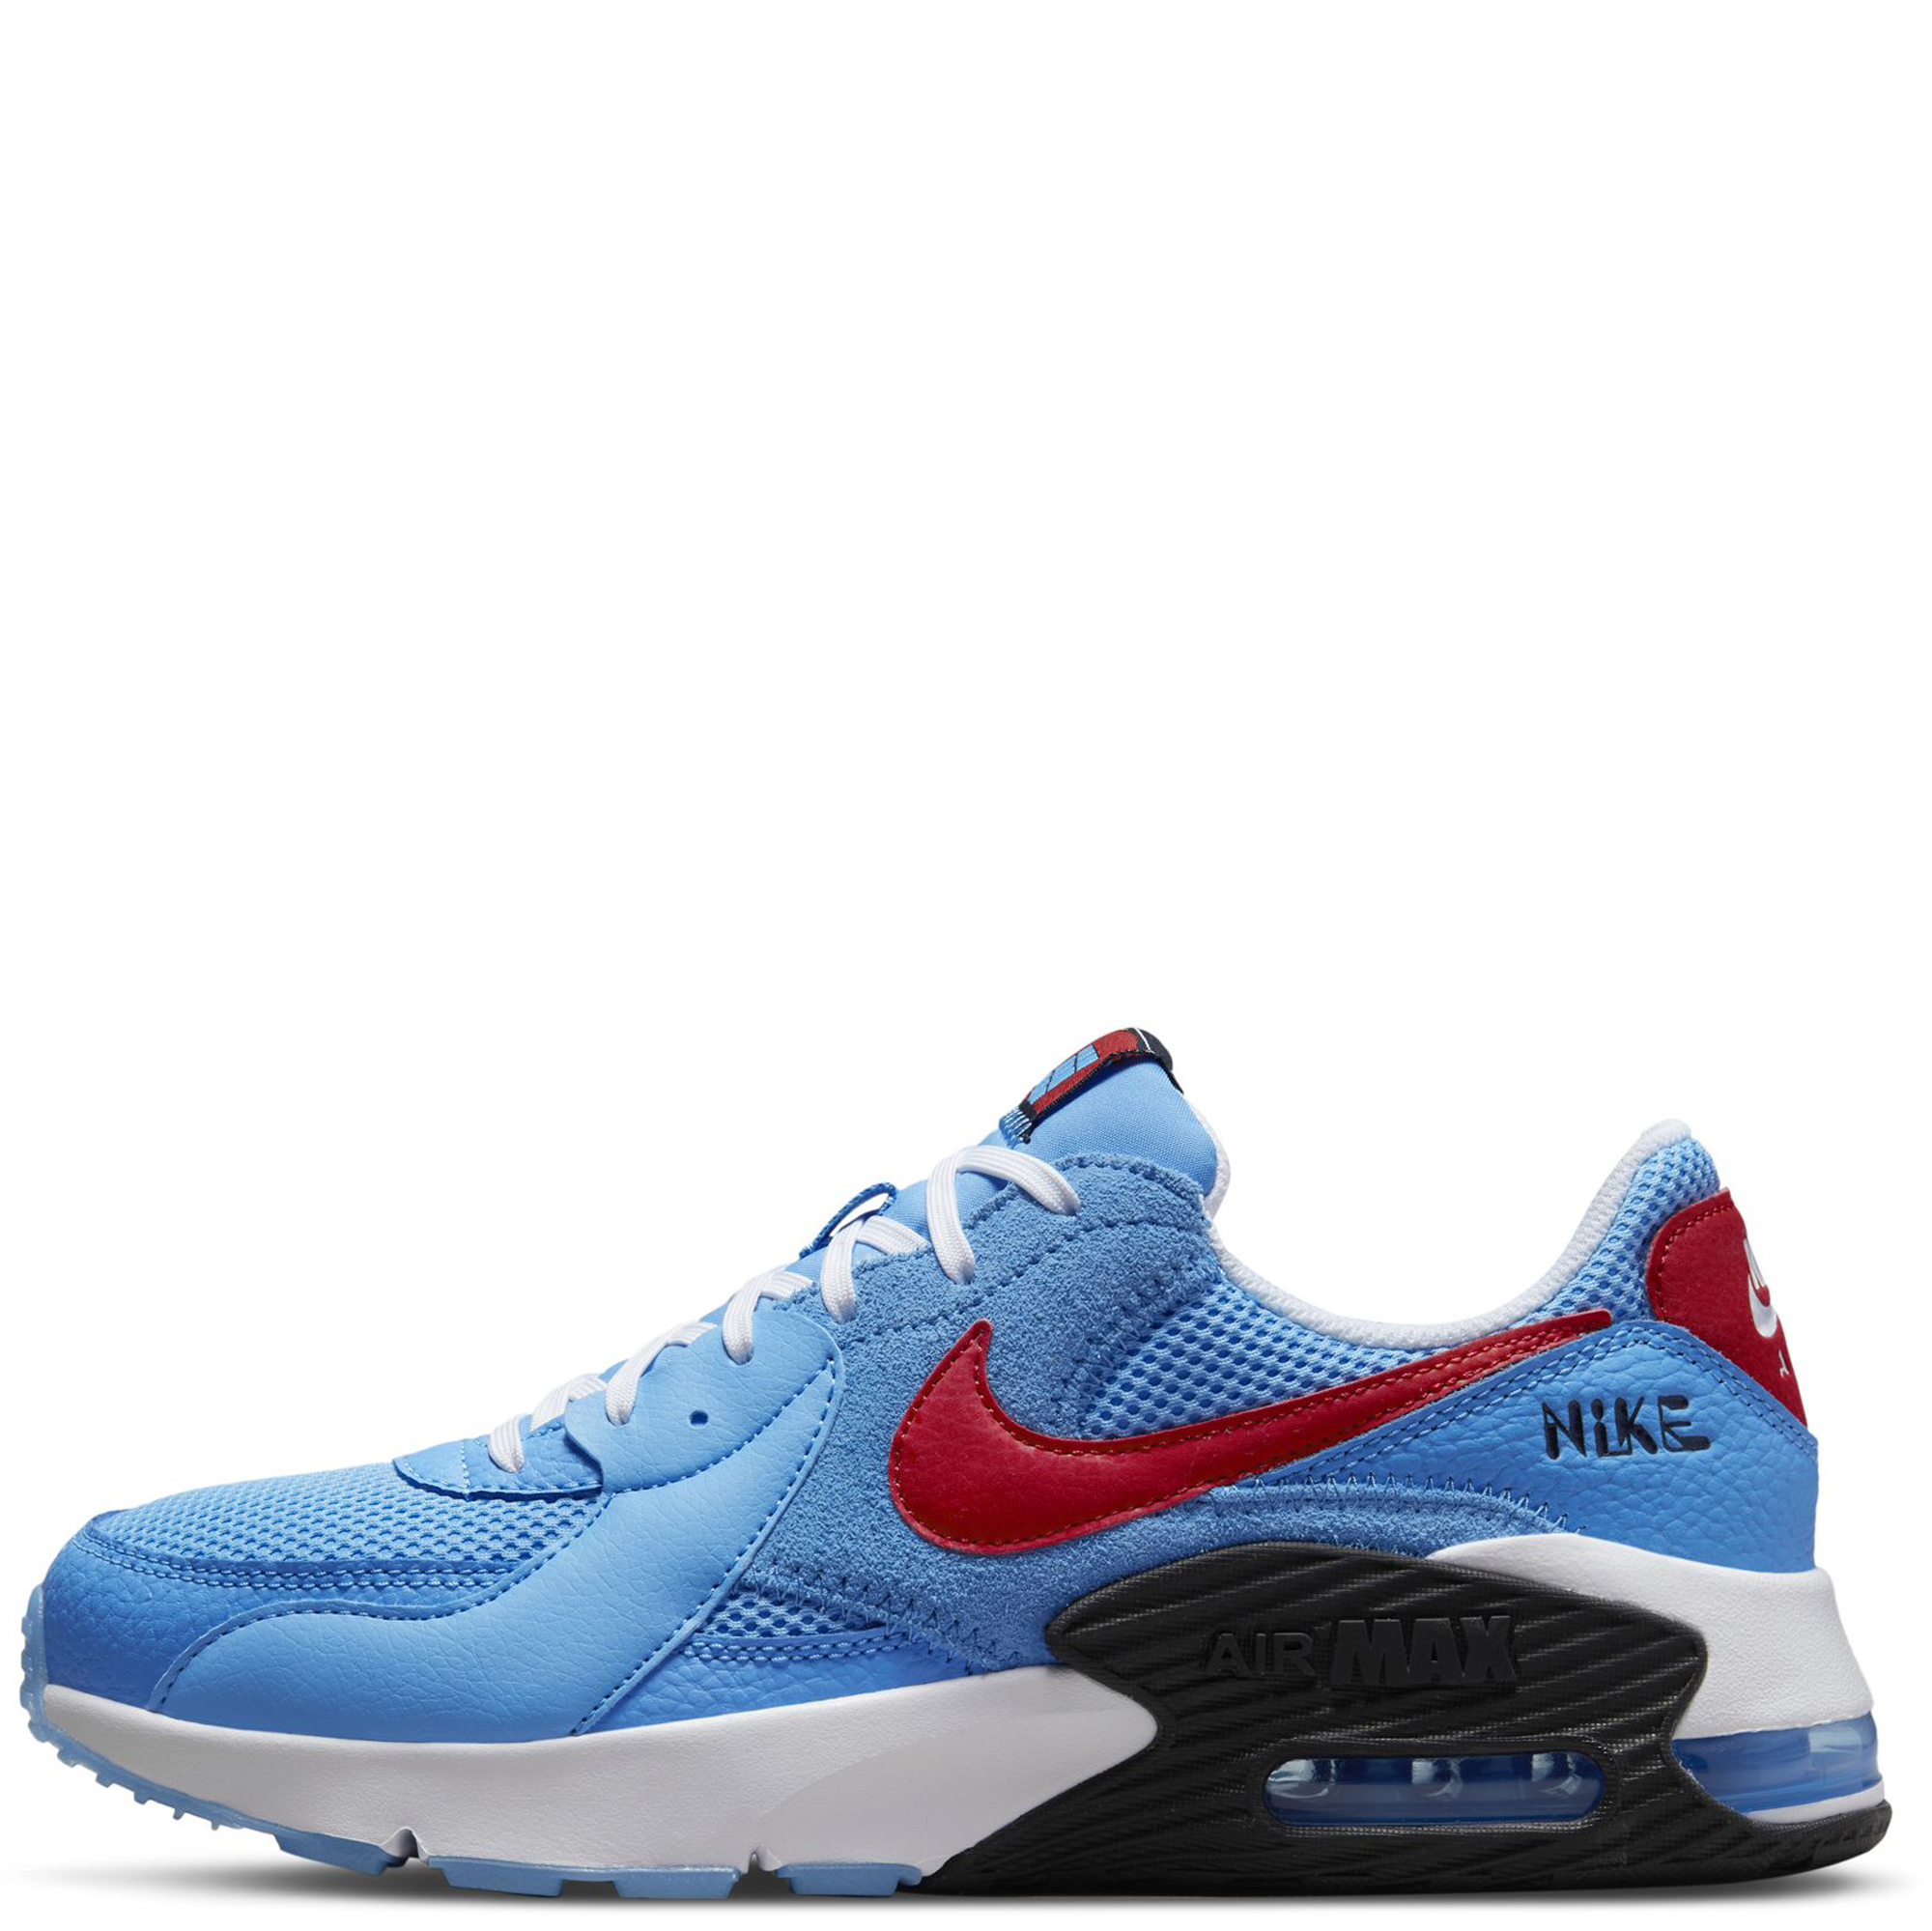 Nike Air Max Excee Shoes.